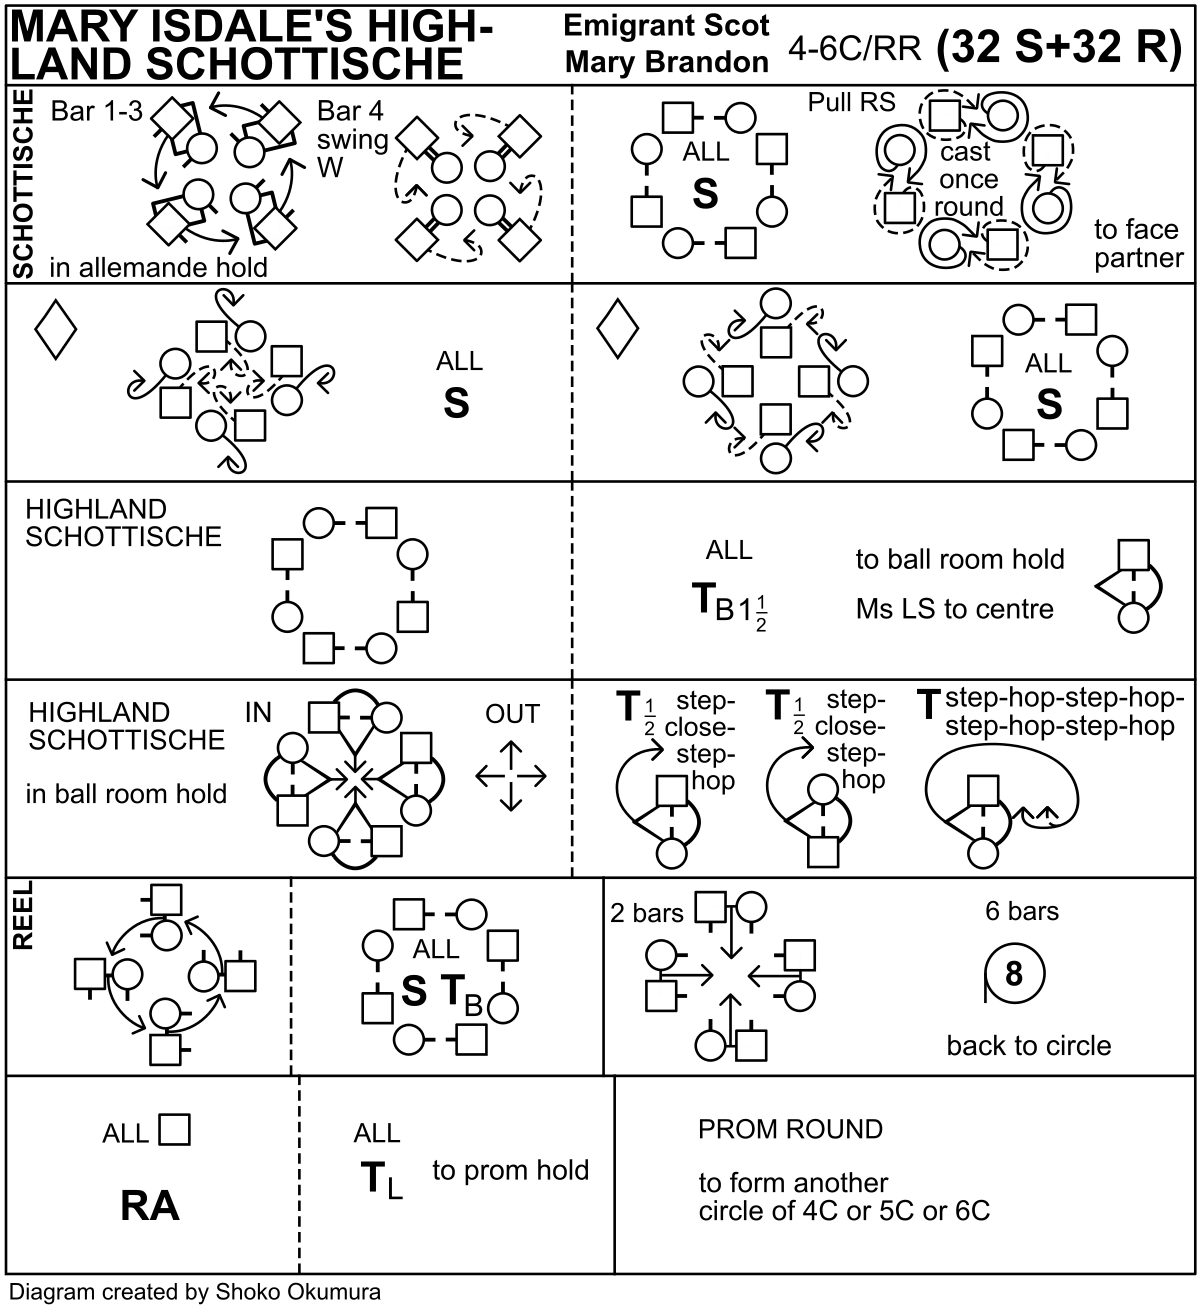 Mary Isdale's Highland Schottische Keith Rose's Diagram